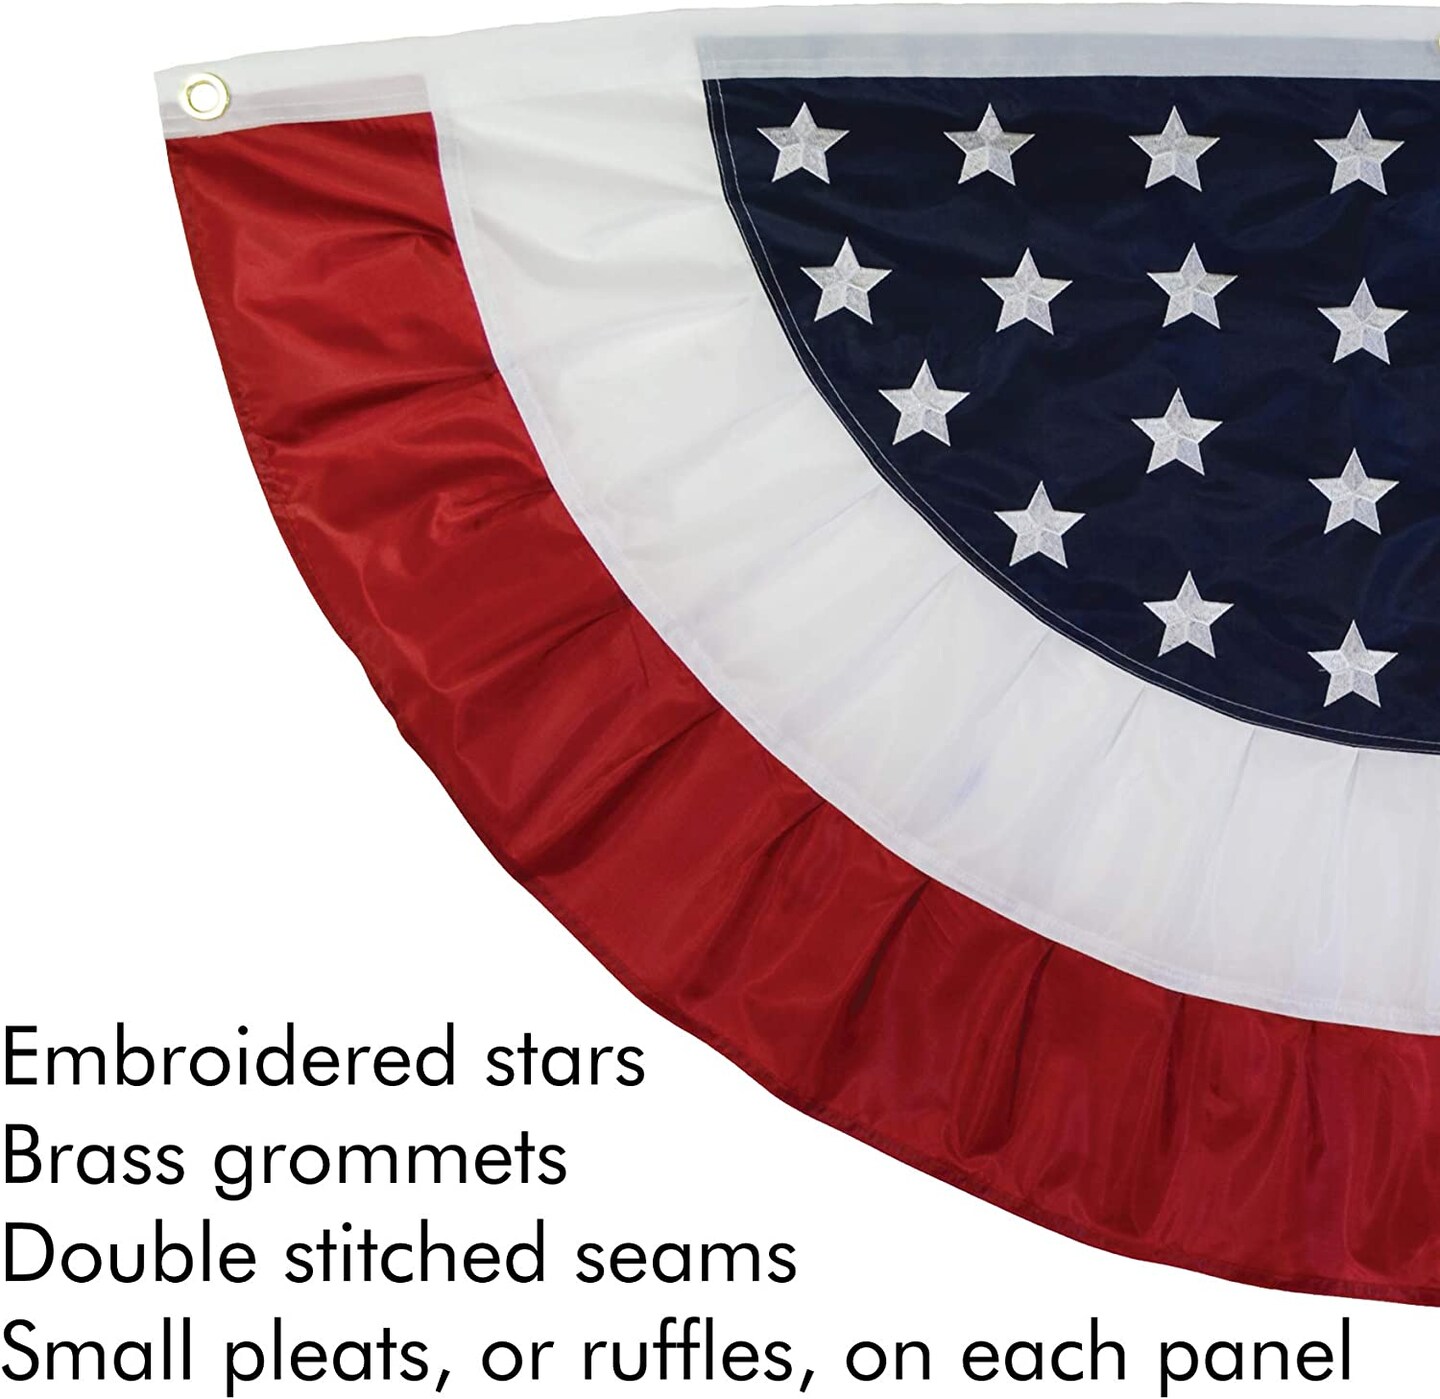 In the Breeze 3707 - Patriotic Ruffle Corner Bunting - Set of 2 - Outdoor Red, White and Blue Decoration